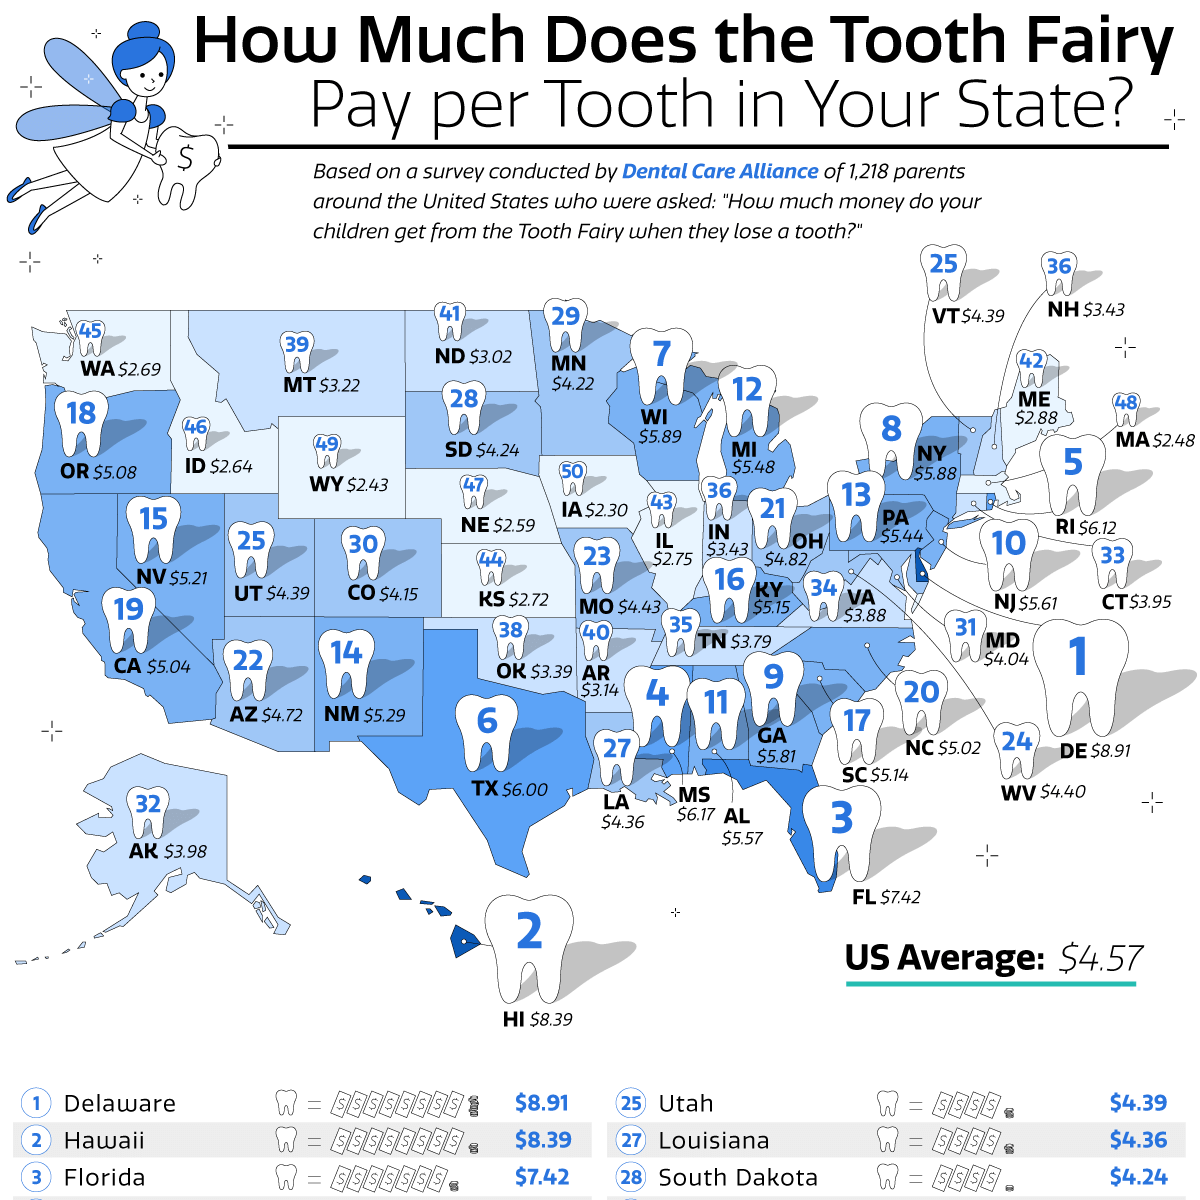 How Much Does the Tooth Fairy Pay per Tooth in Your State? Dental